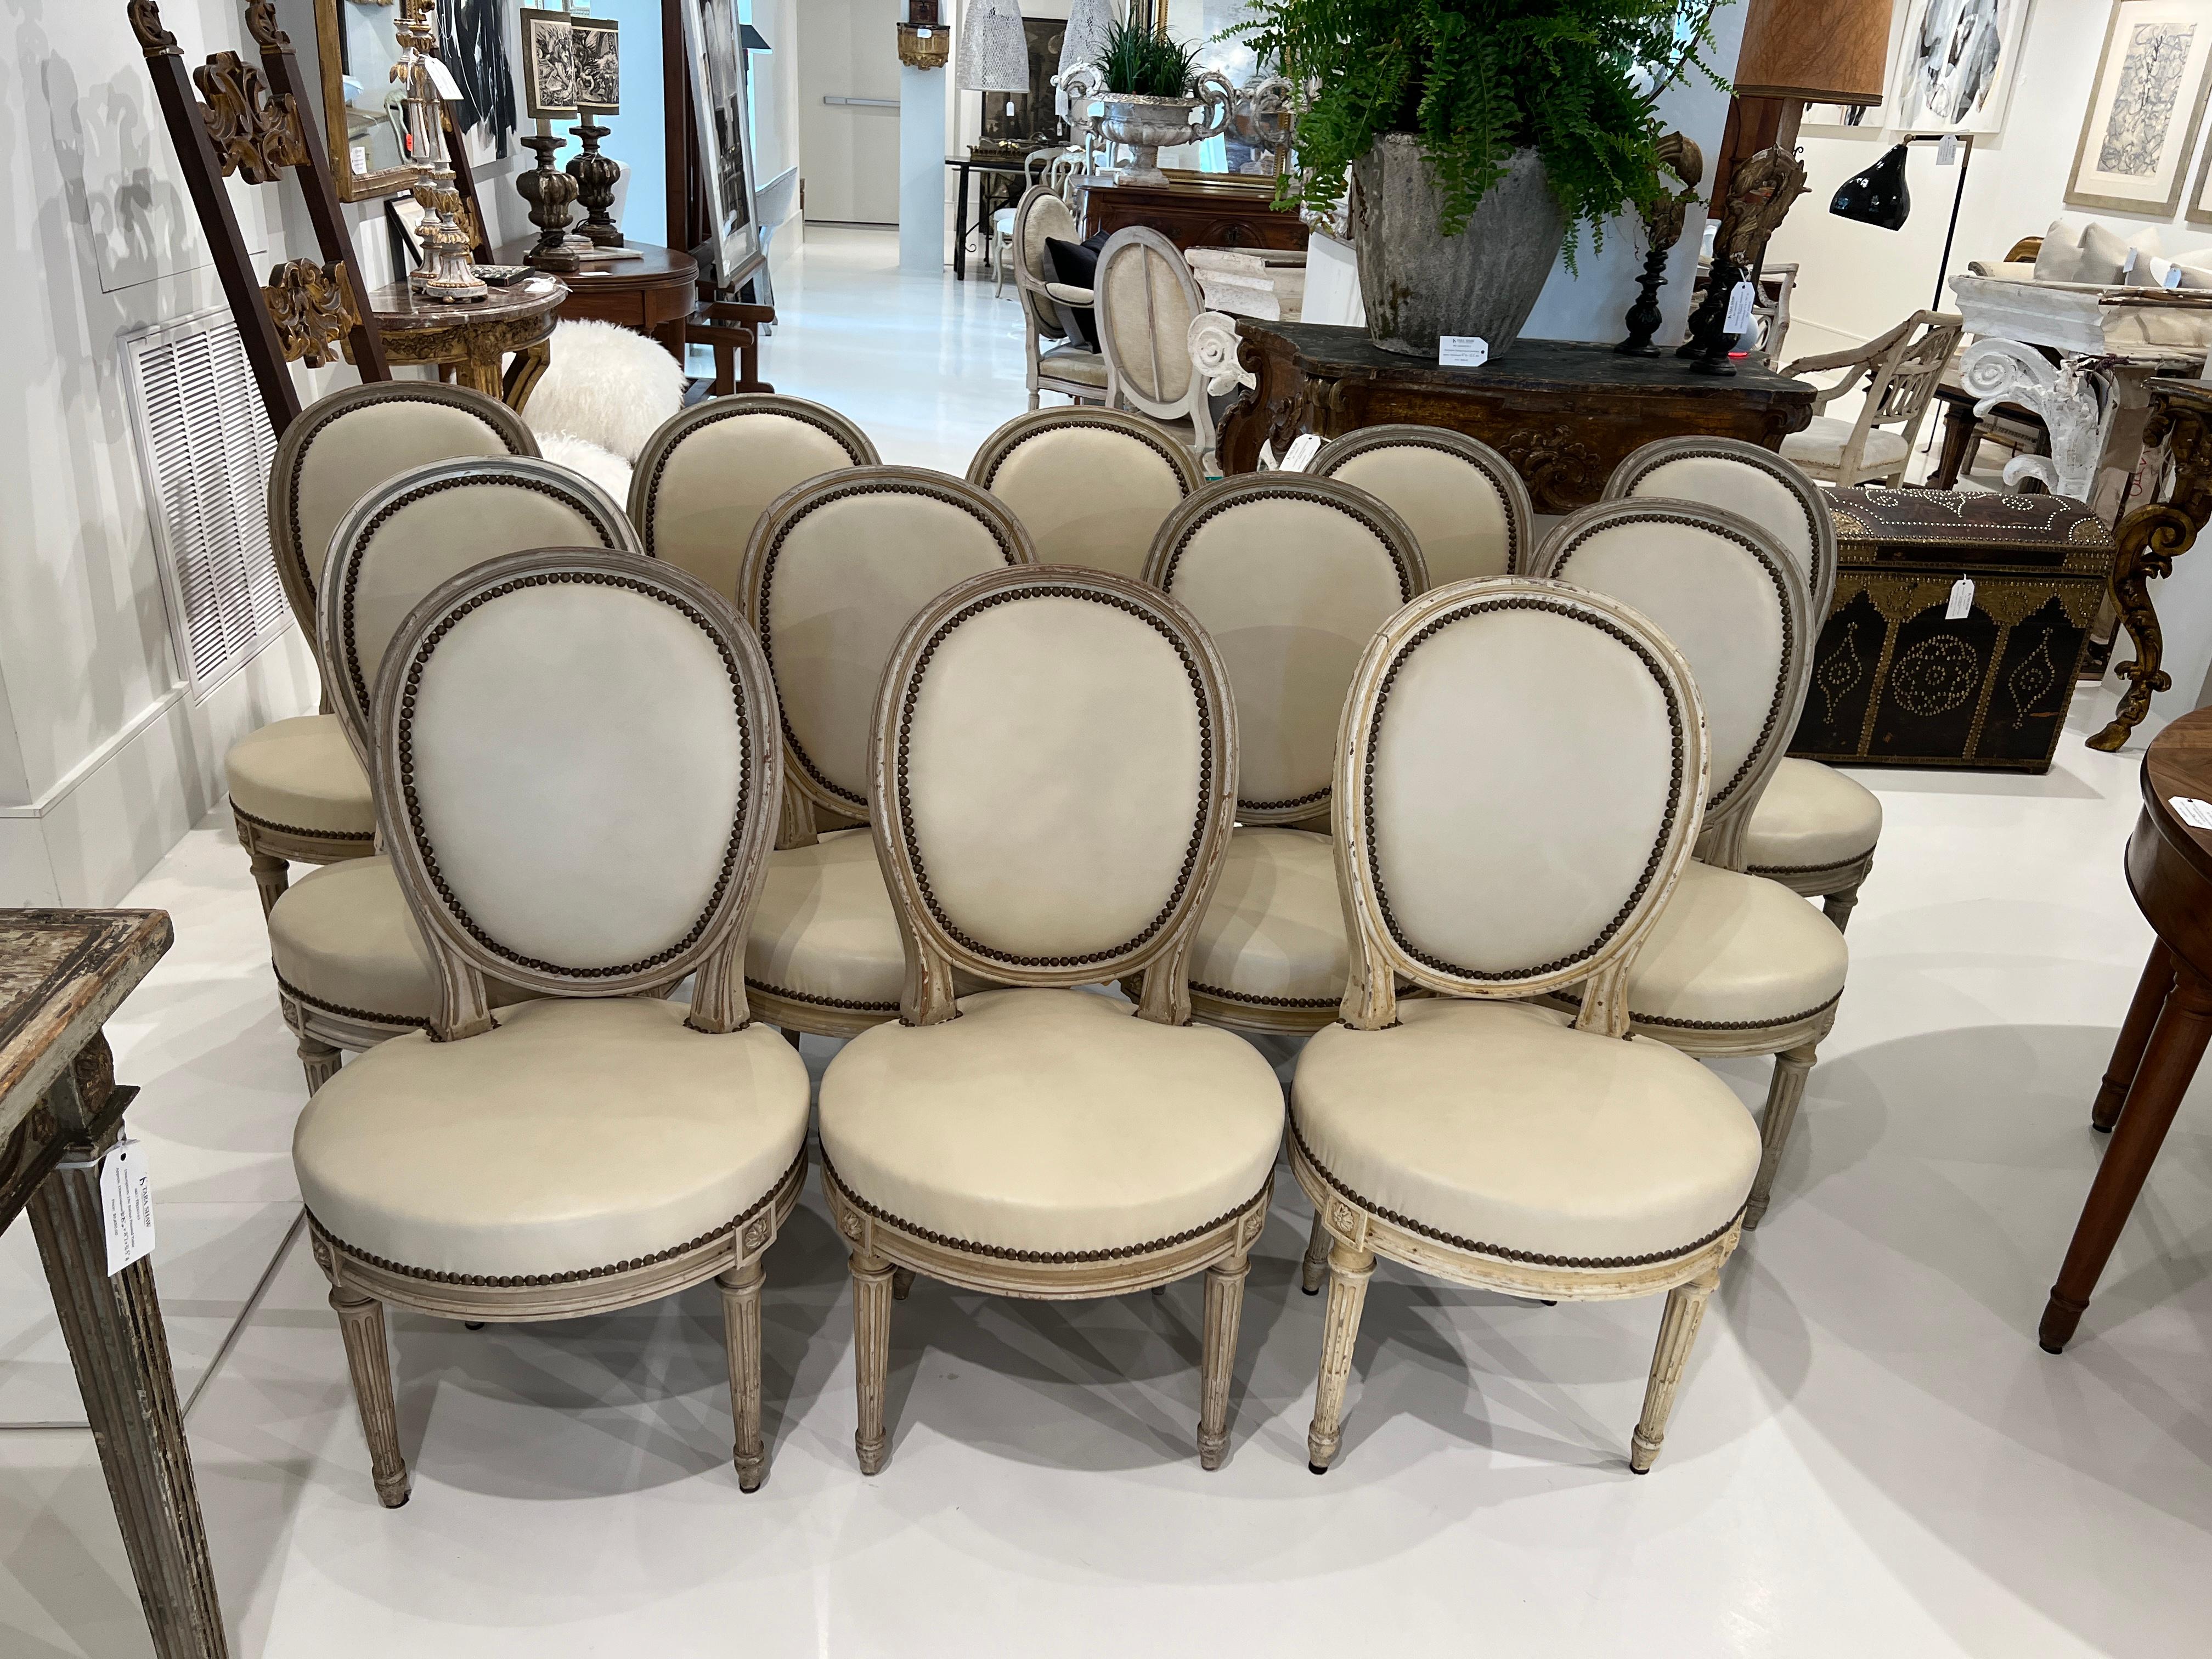 Set of 12 Oval Back Chairs with Leather 6